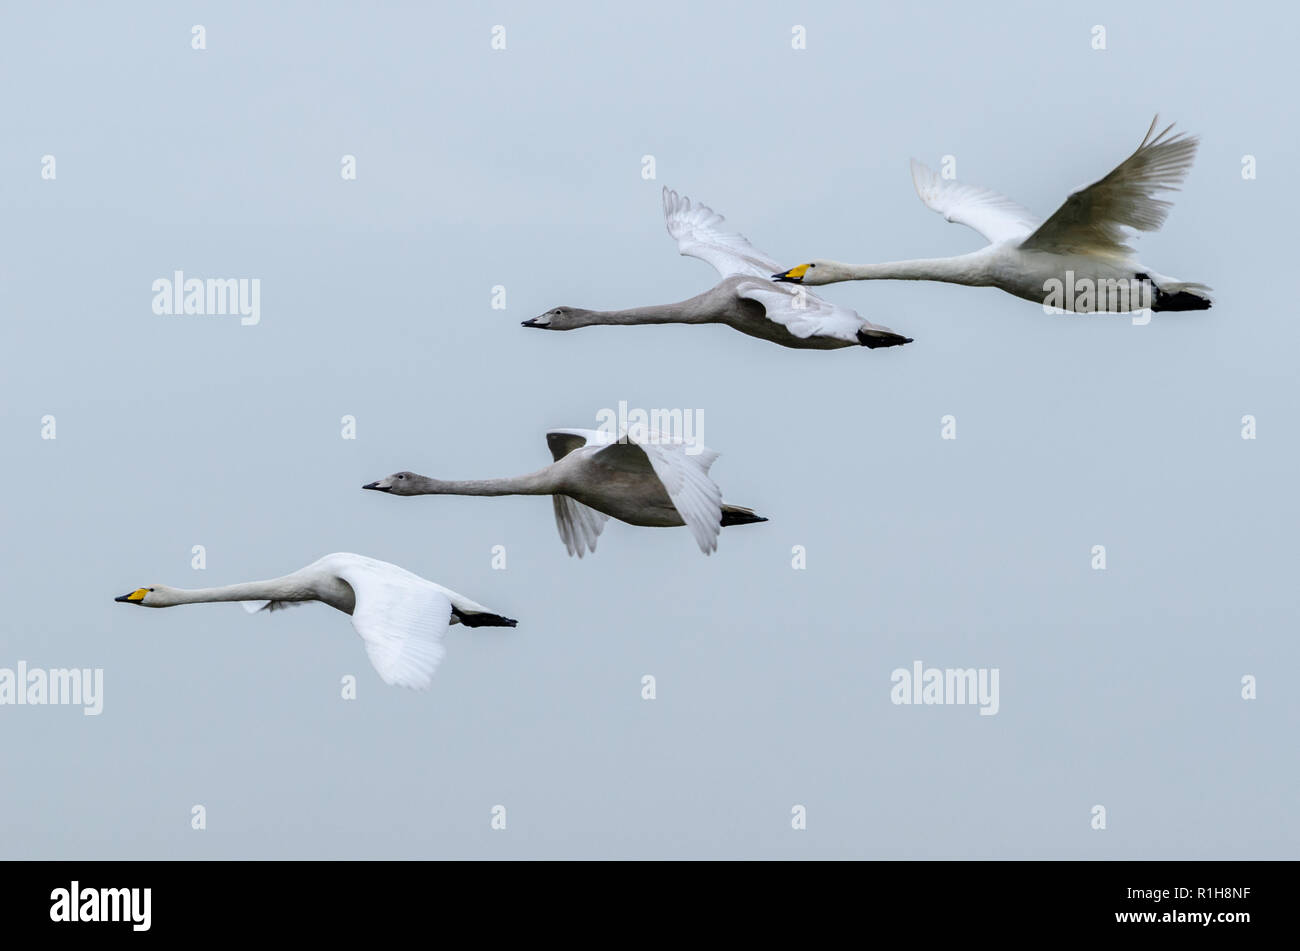 A family of Whooper swans in flight Stock Photo